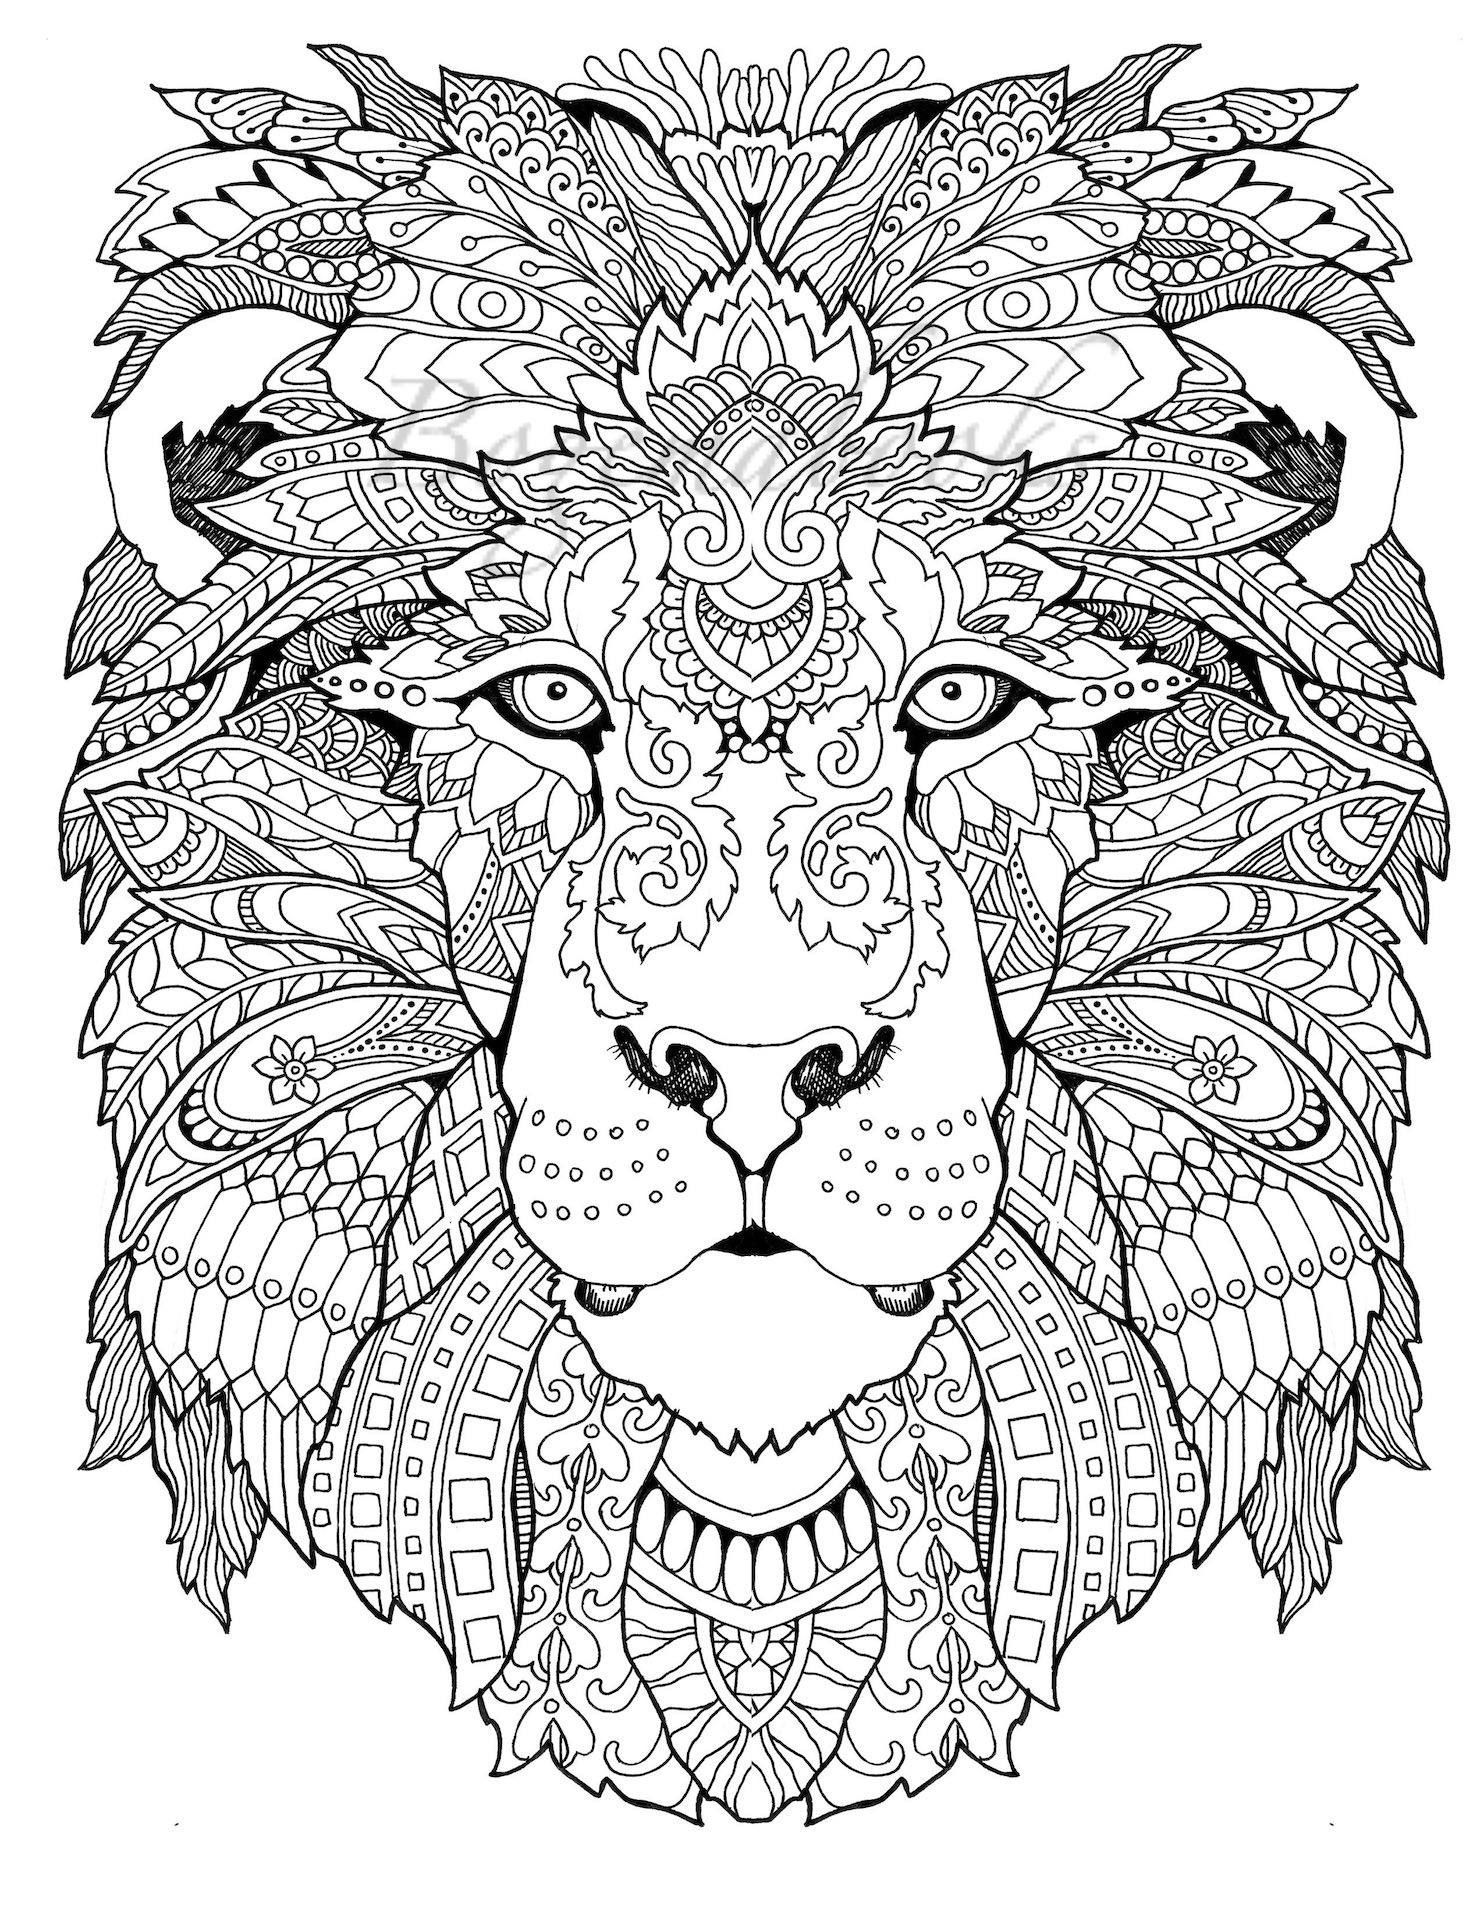 Awesome Animals Adult Coloring Book Coloring Pages Pdf | Awesome - Free Printable Coloring Books Pdf